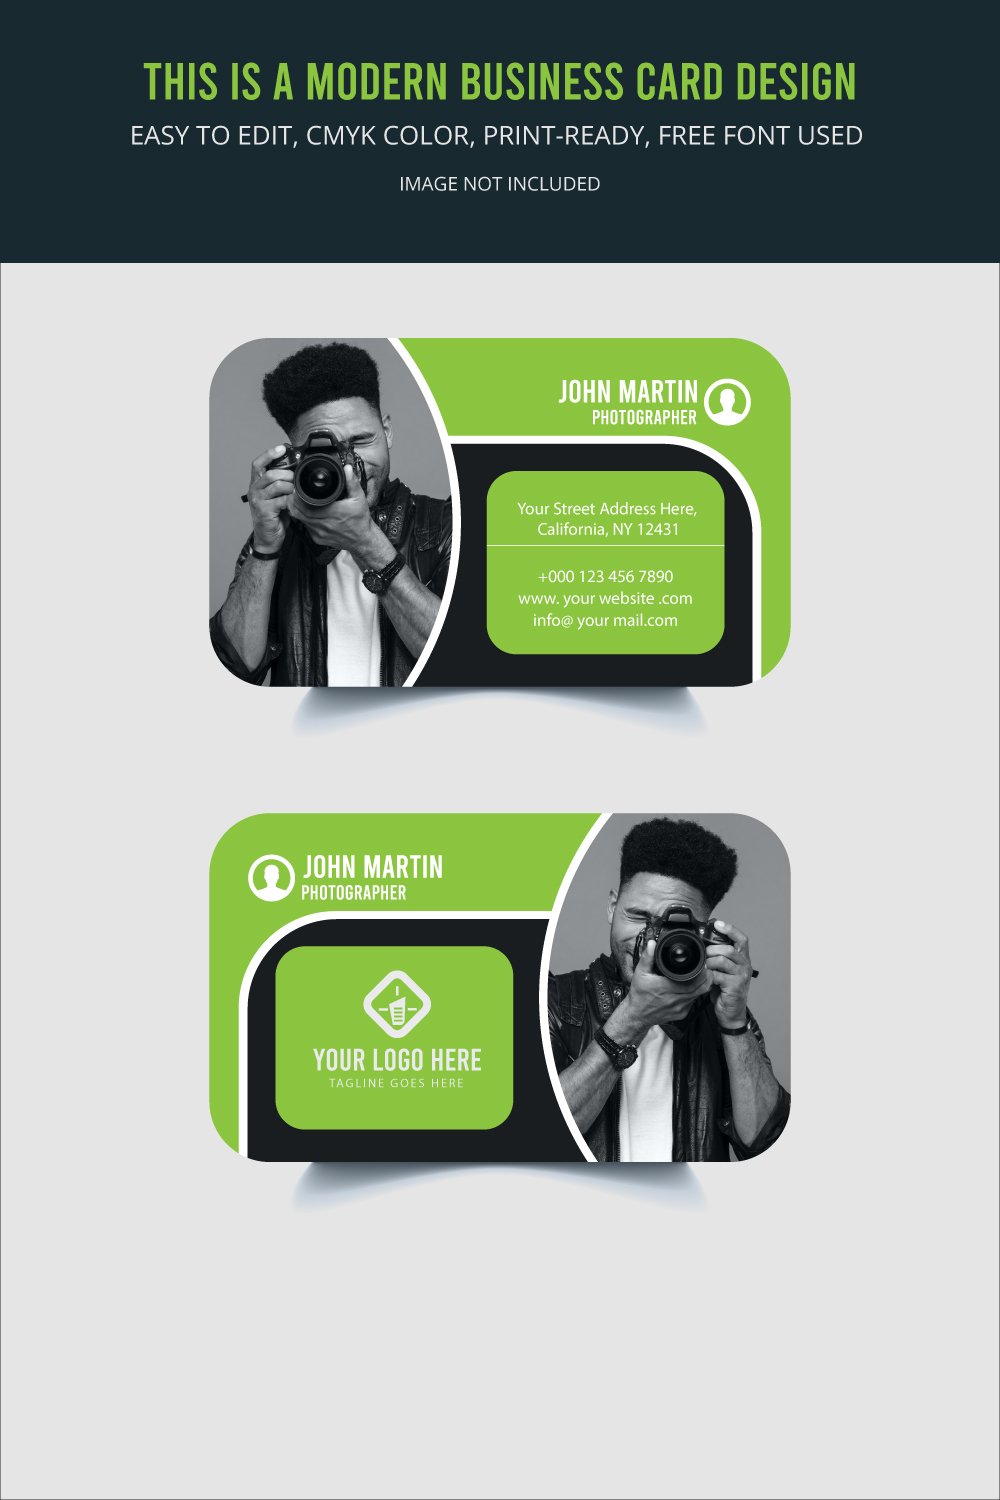 Green and black business card with a man holding a camera.